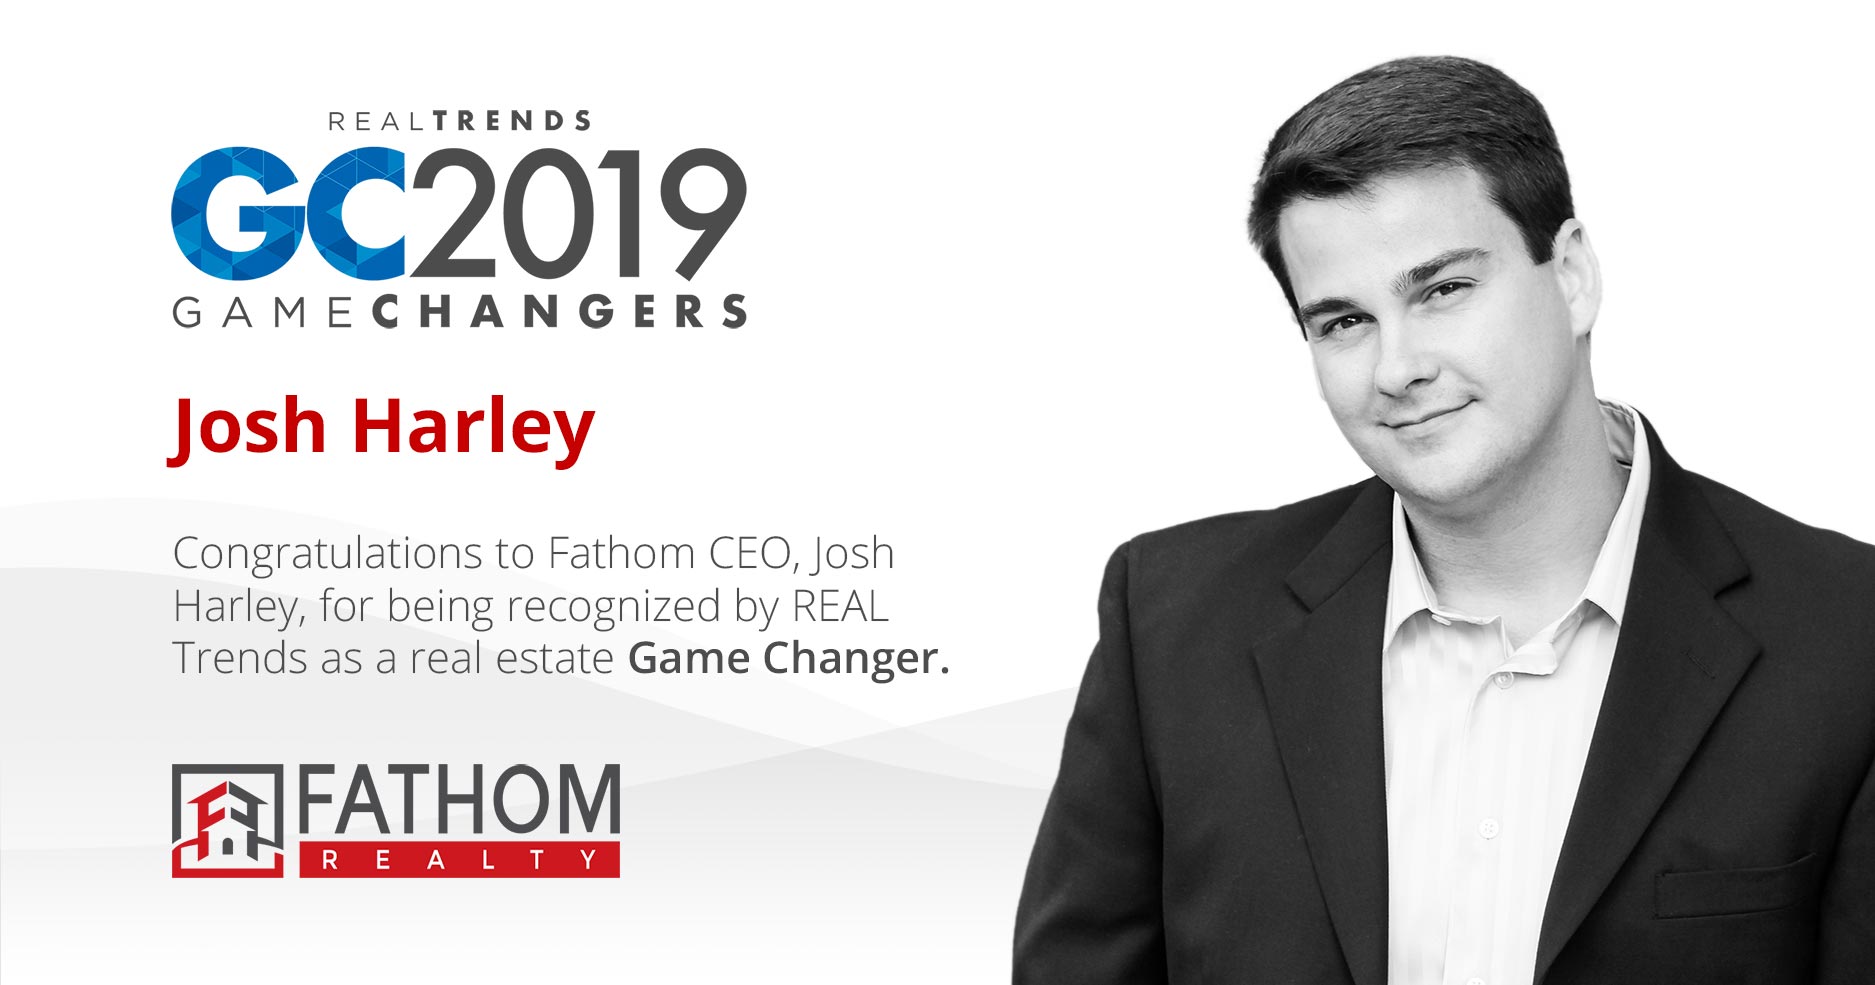 Featured image for “Fathom CEO Recognized as “Game Changer” By REAL Trends”